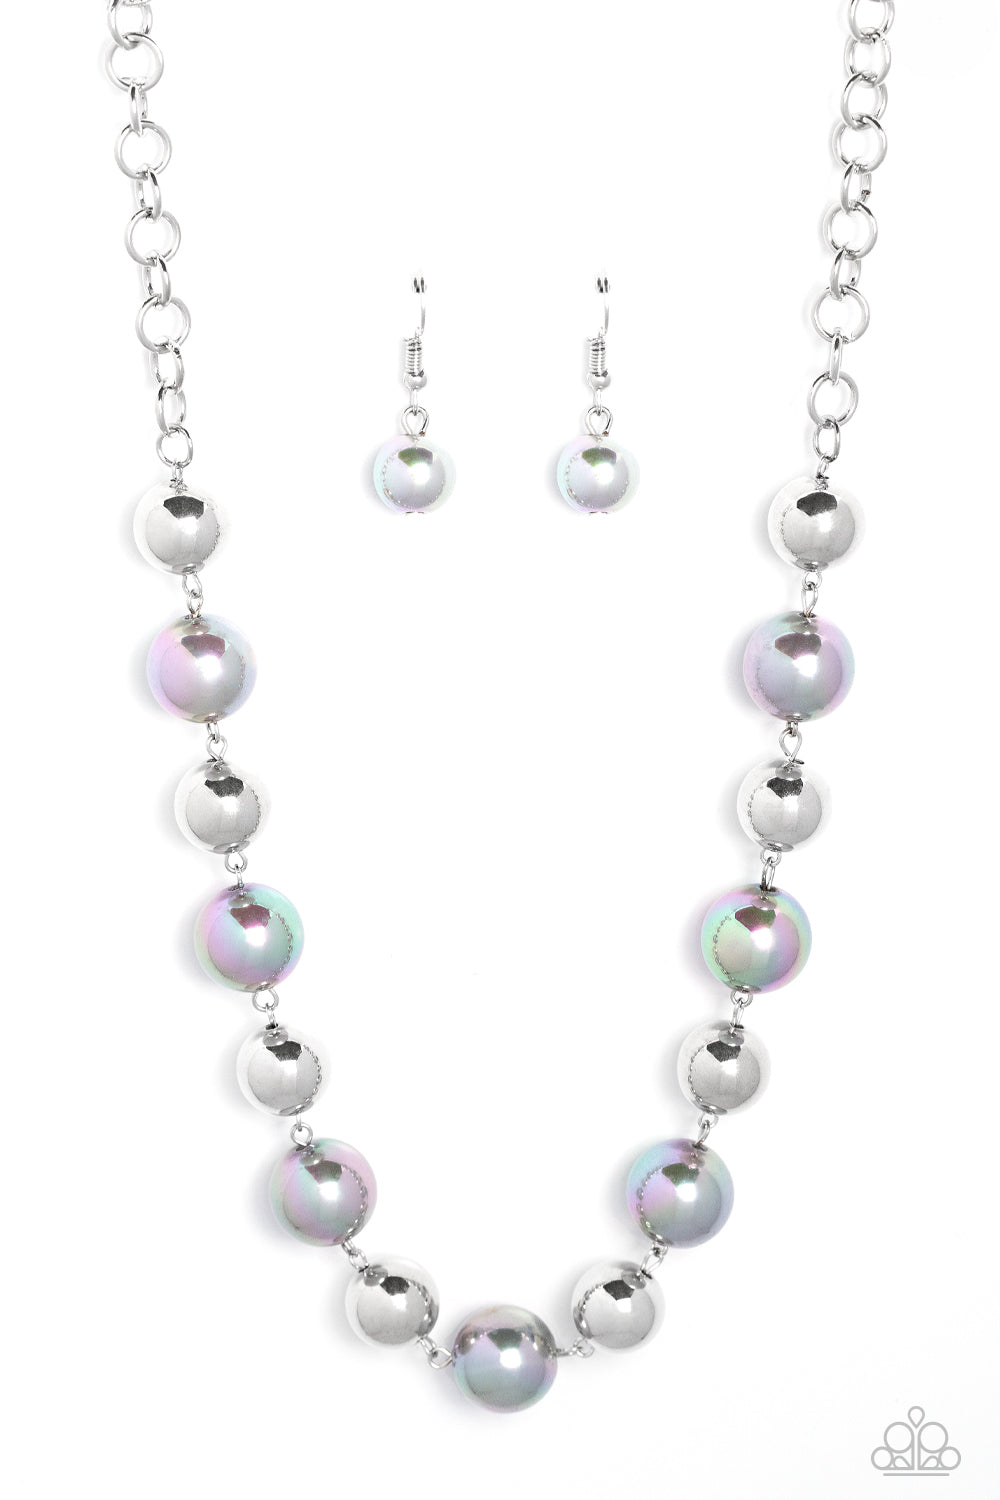 Paparazzi Dreamscape Escape - Silver Iridescent Necklaces dipped in an iridescent finish, oversized silver pearls alternate with shiny silver beads below the collar for a dreamy pop of shimmer. Features an adjustable clasp closure.  Sold as one individual necklace. Includes one pair of matching earrings.  Get The Complete Look! Bracelet: "A DREAMSCAPE Come True - Silver" (Sold Separately)